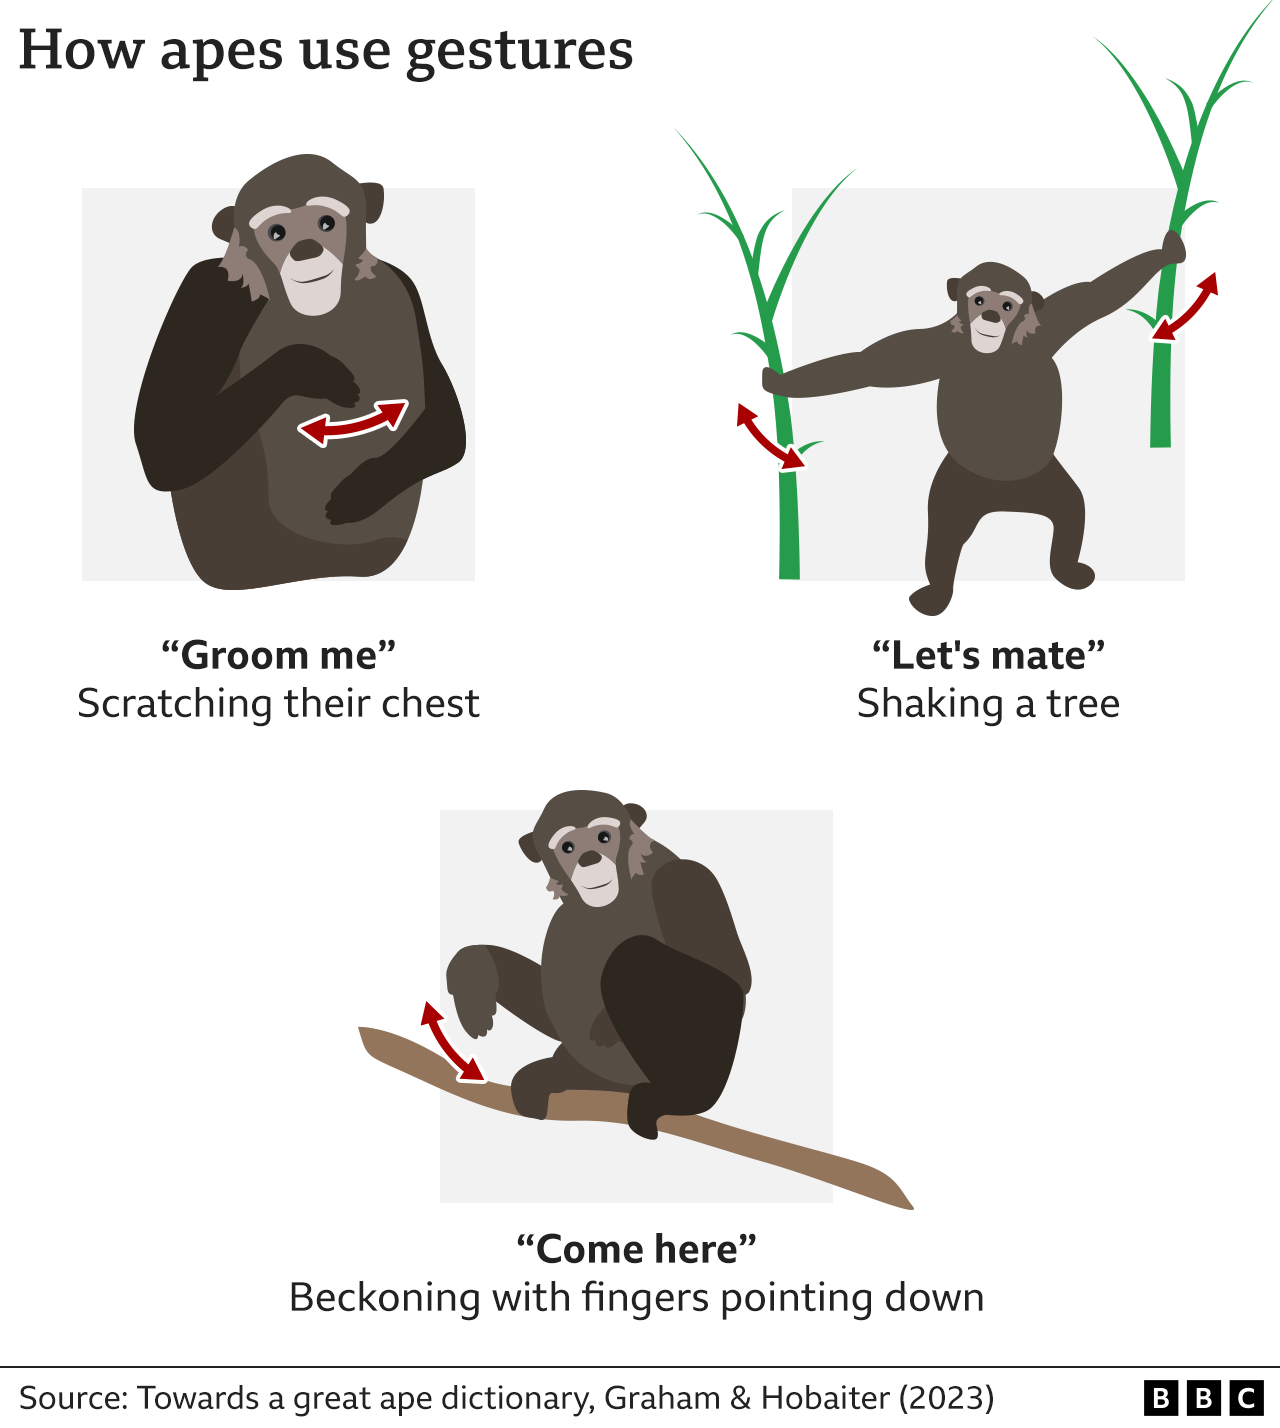 A graphic showing some ways in which apes communicate, including by scratching their chest to say they want to be groomed, shaking a tree to indicate a willingness to mate, and beckoning with their fingers pointing down when they want another ape to come towards them.